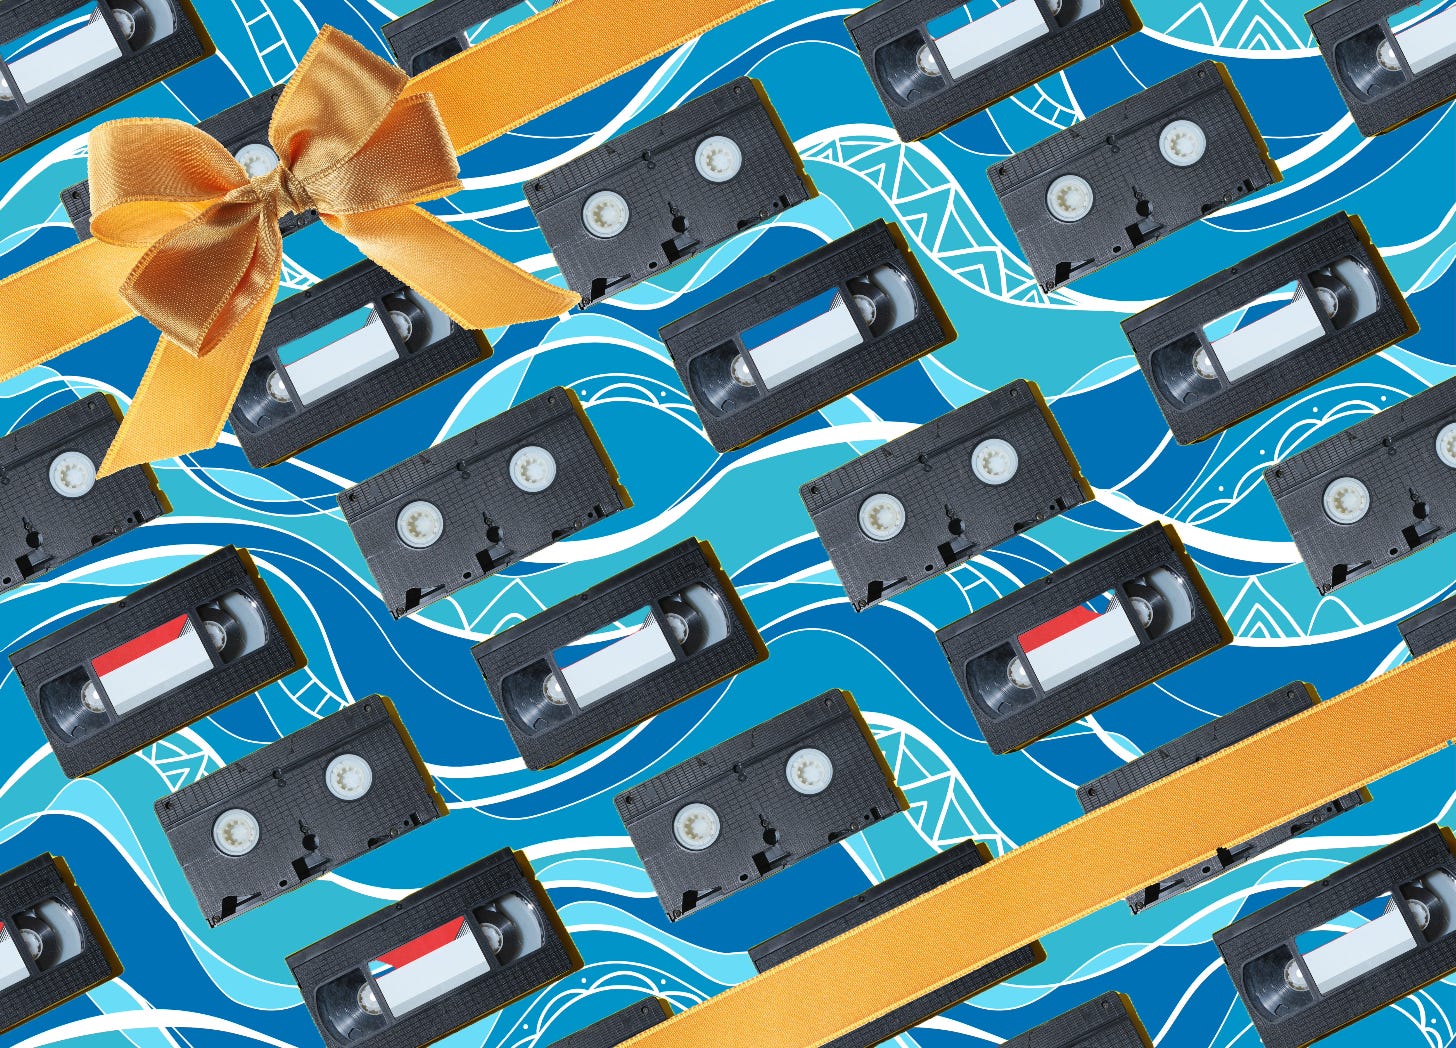 vhs tape wrapping paper for Hanukkah designed by Sam Zee and Adobe